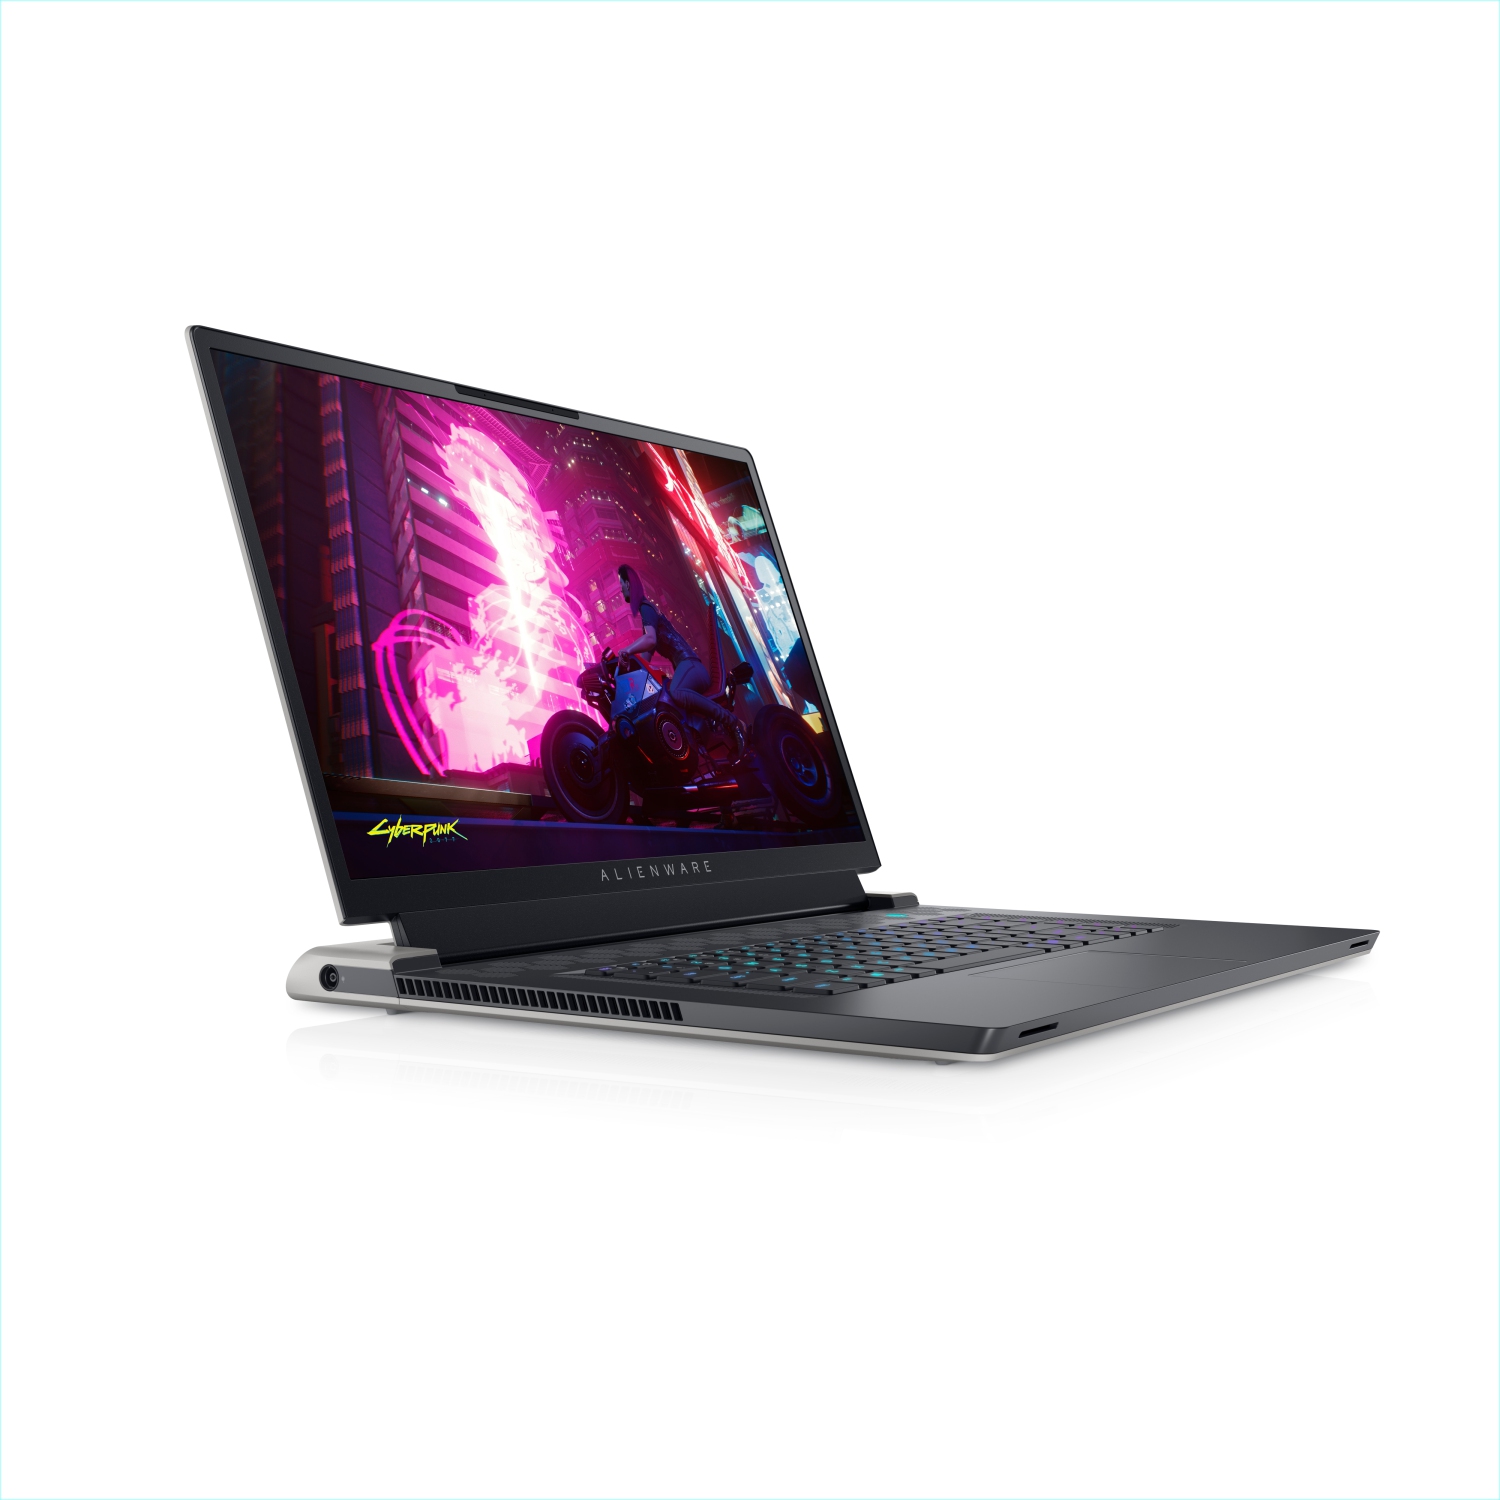 Refurbished (Excellent) - Dell Alienware X17 R1 Gaming Laptop (2021), 17.3" 4K, Core i7, 1TB SSD + 512GB SSD, 32GB RAM, RTX 3080, 4.6 GHz, 11th Gen CPU Certified